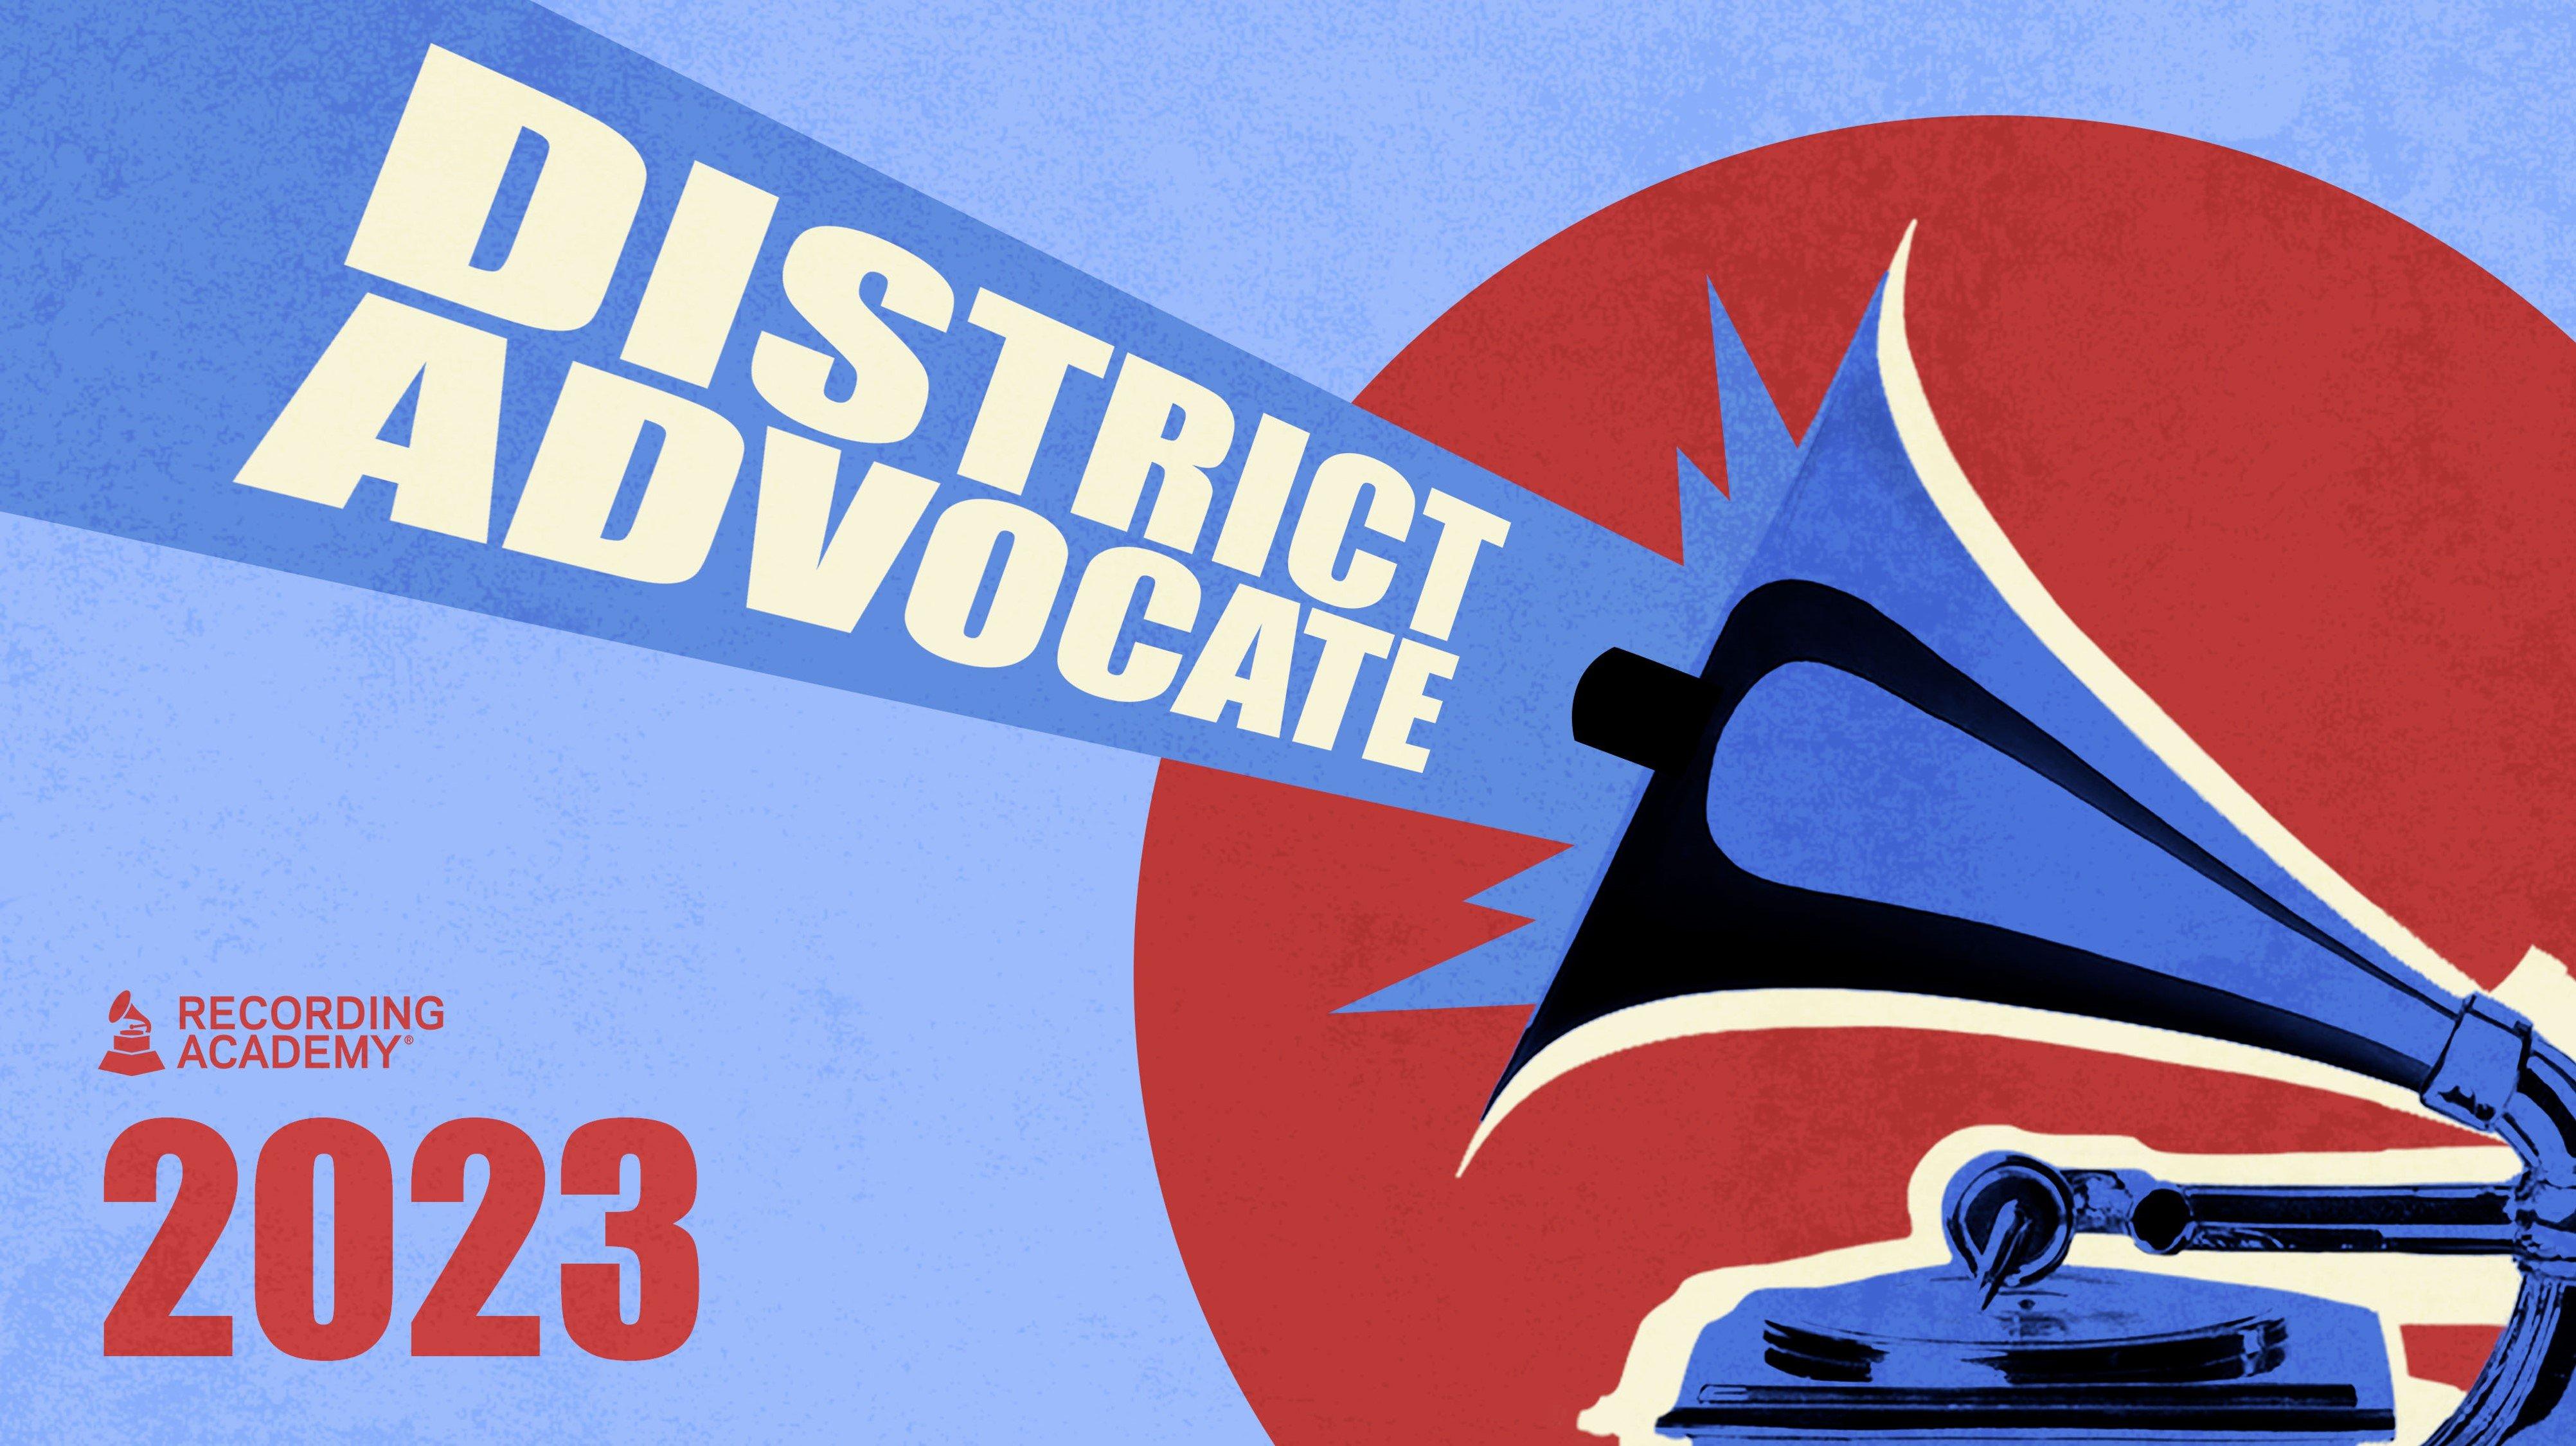 District Advocate Day 2023